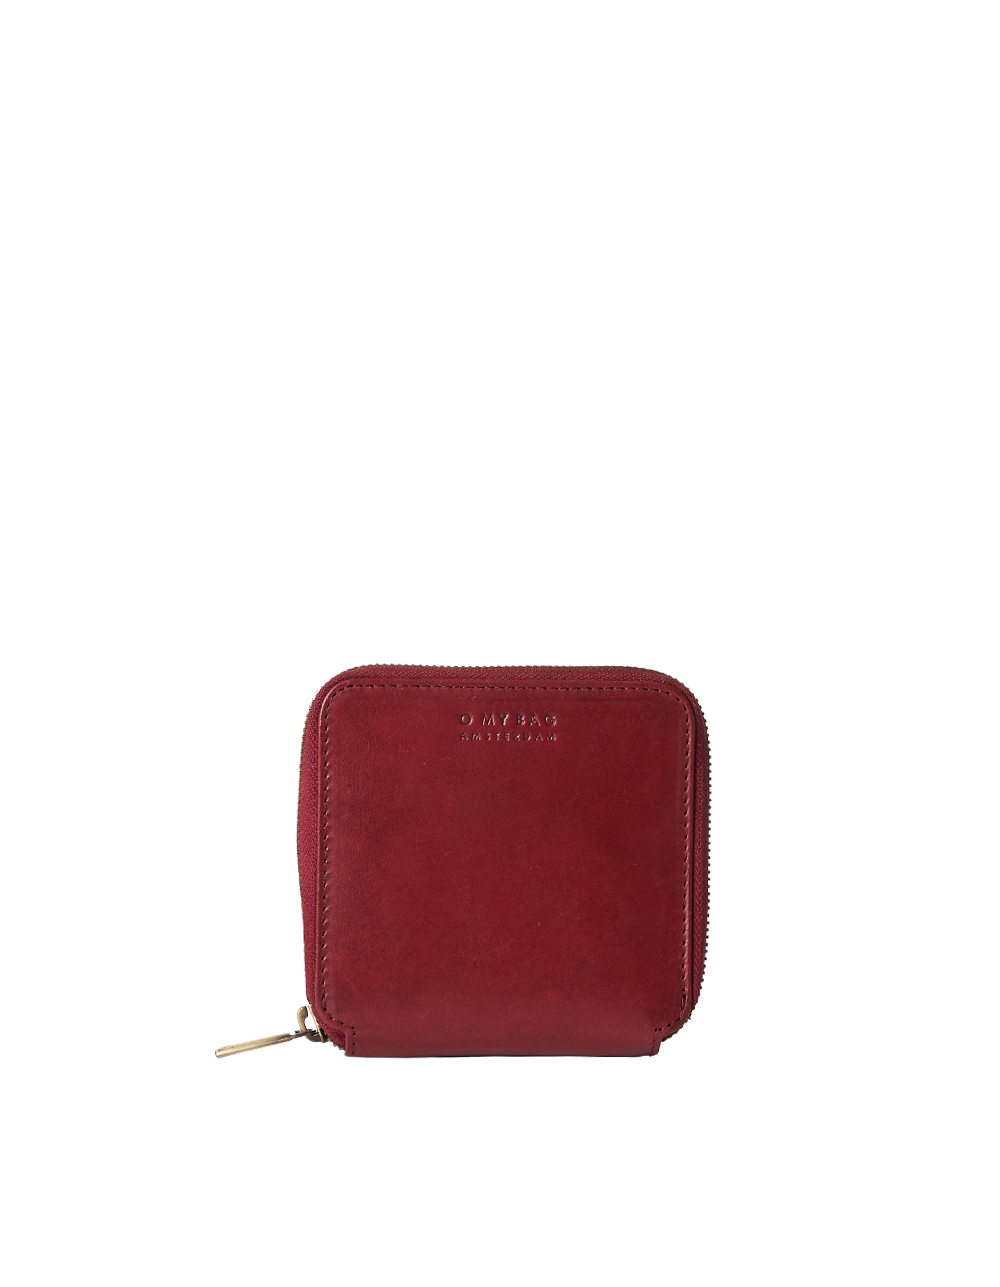 Sonny-Square--wallet-ruby-front-web.png